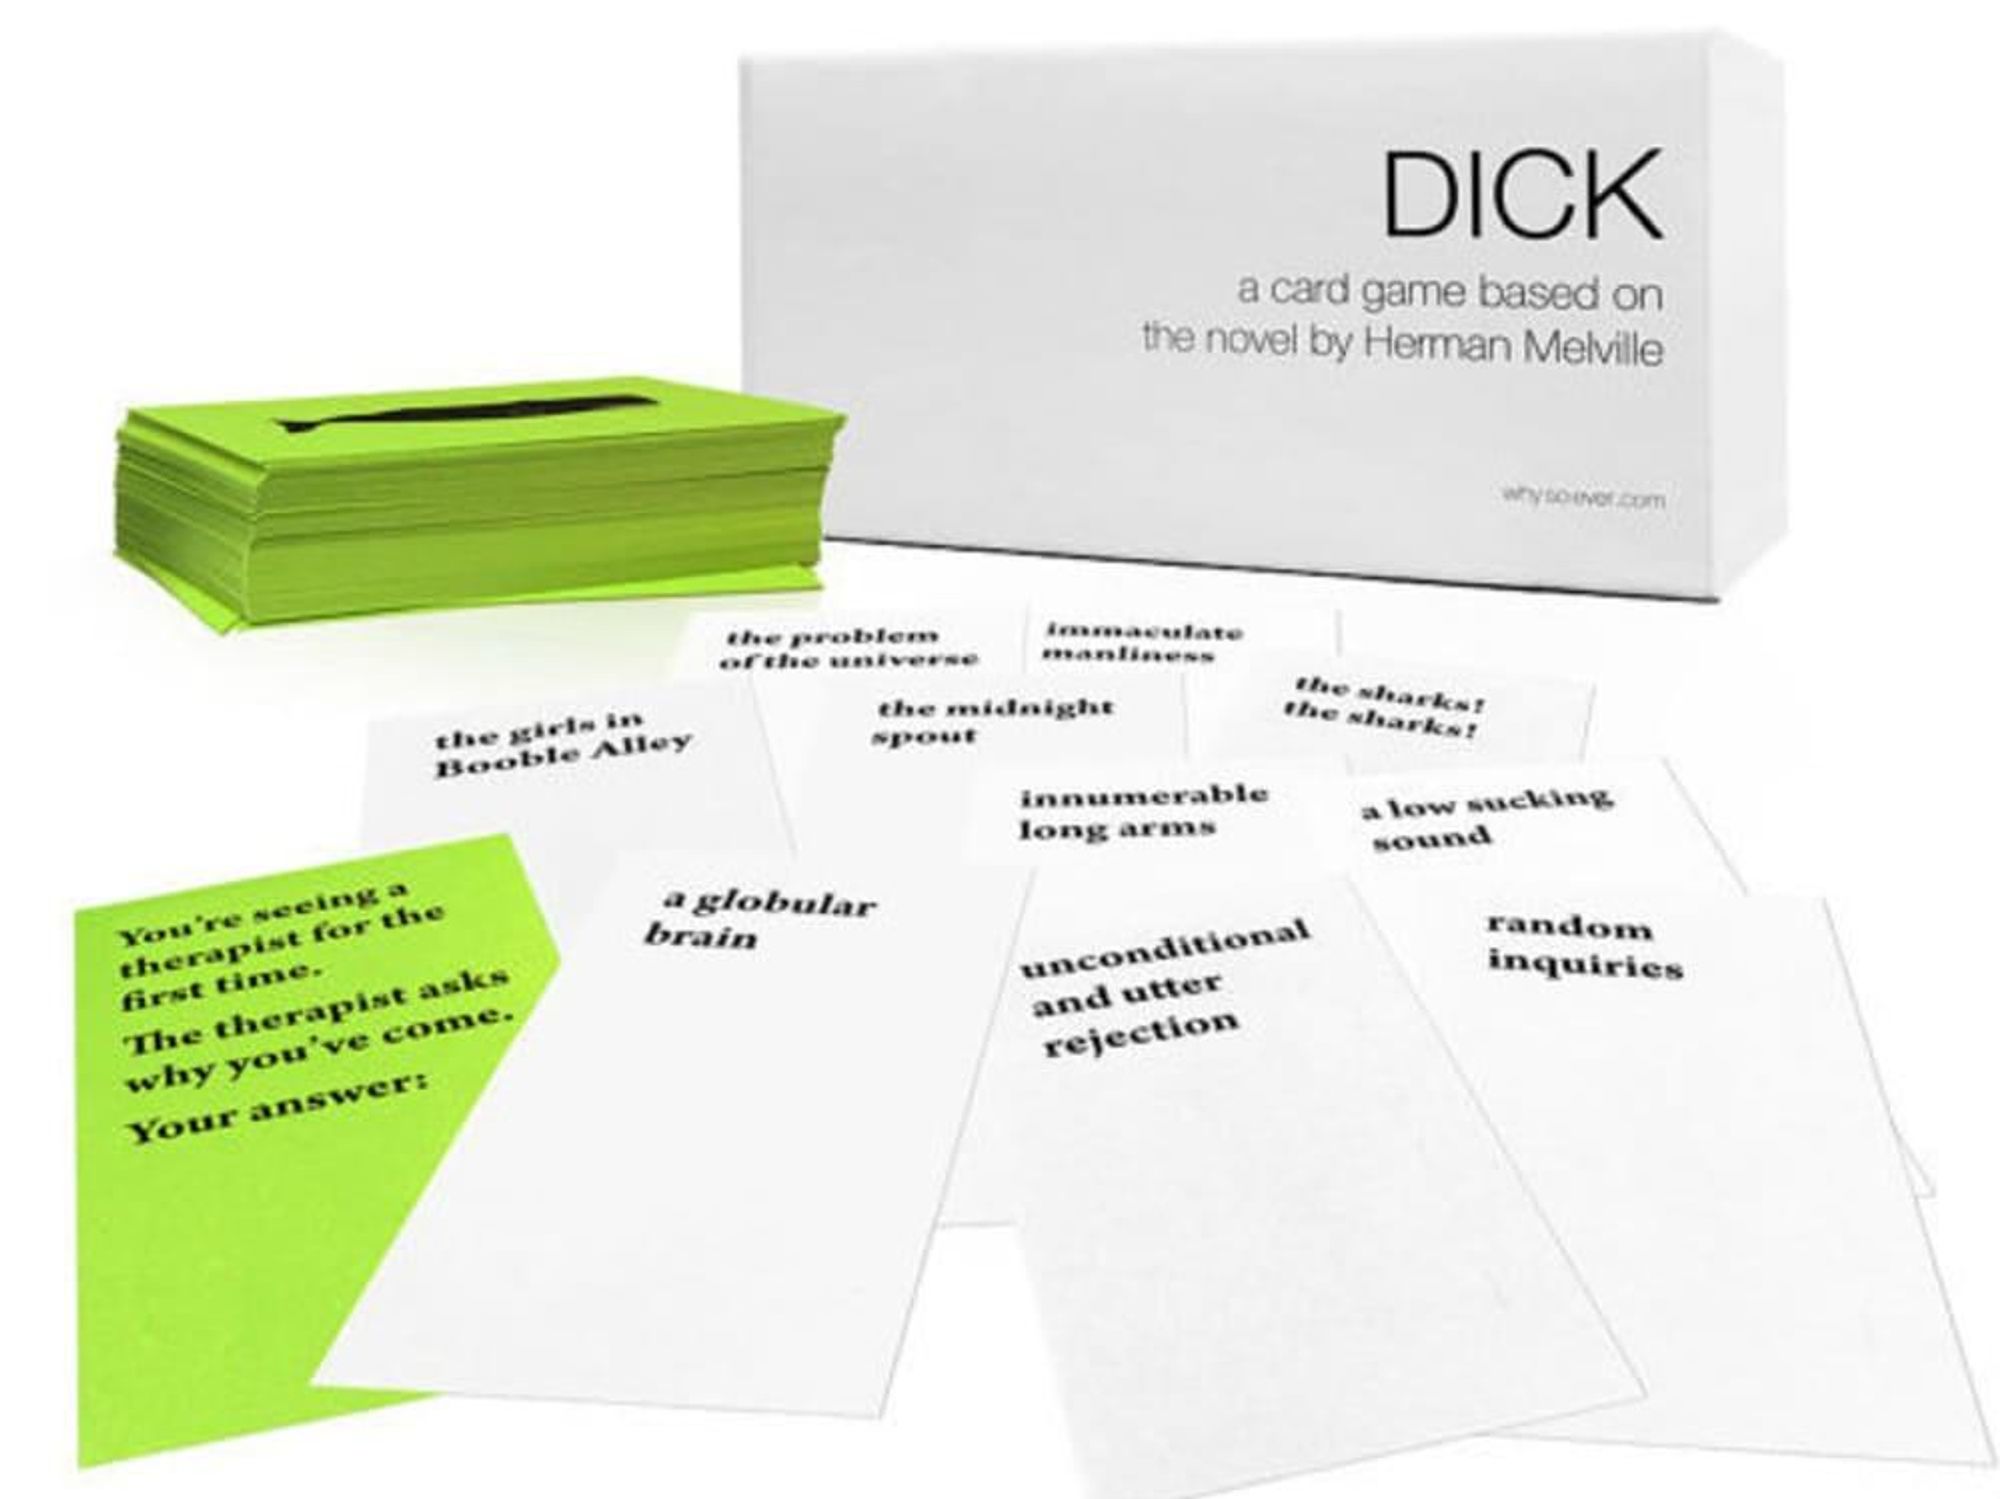 Dick the card game